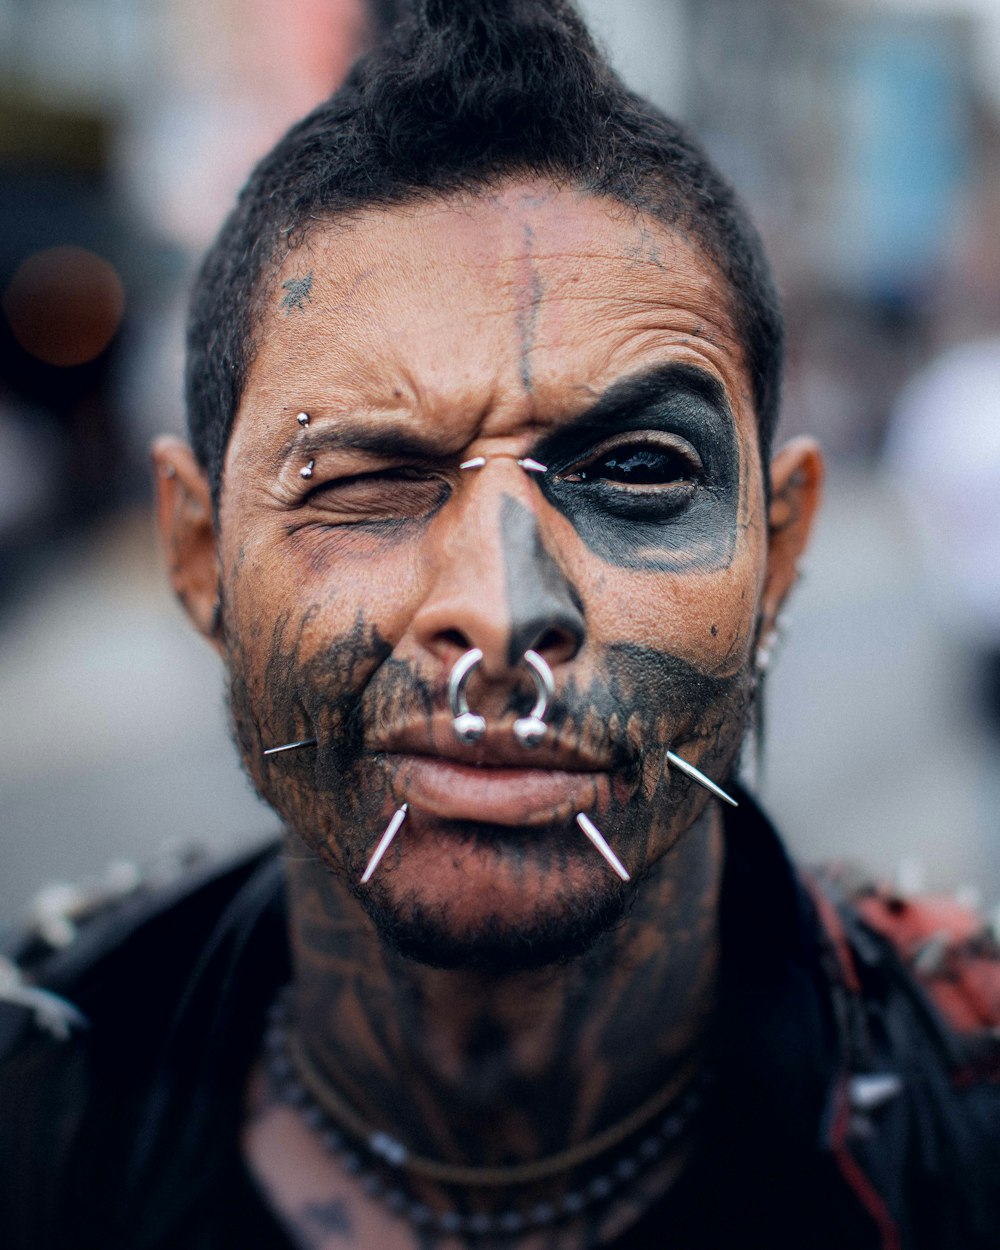 A man with black face paint and piercings on his nose photo – Free Uk Image  on Unsplash